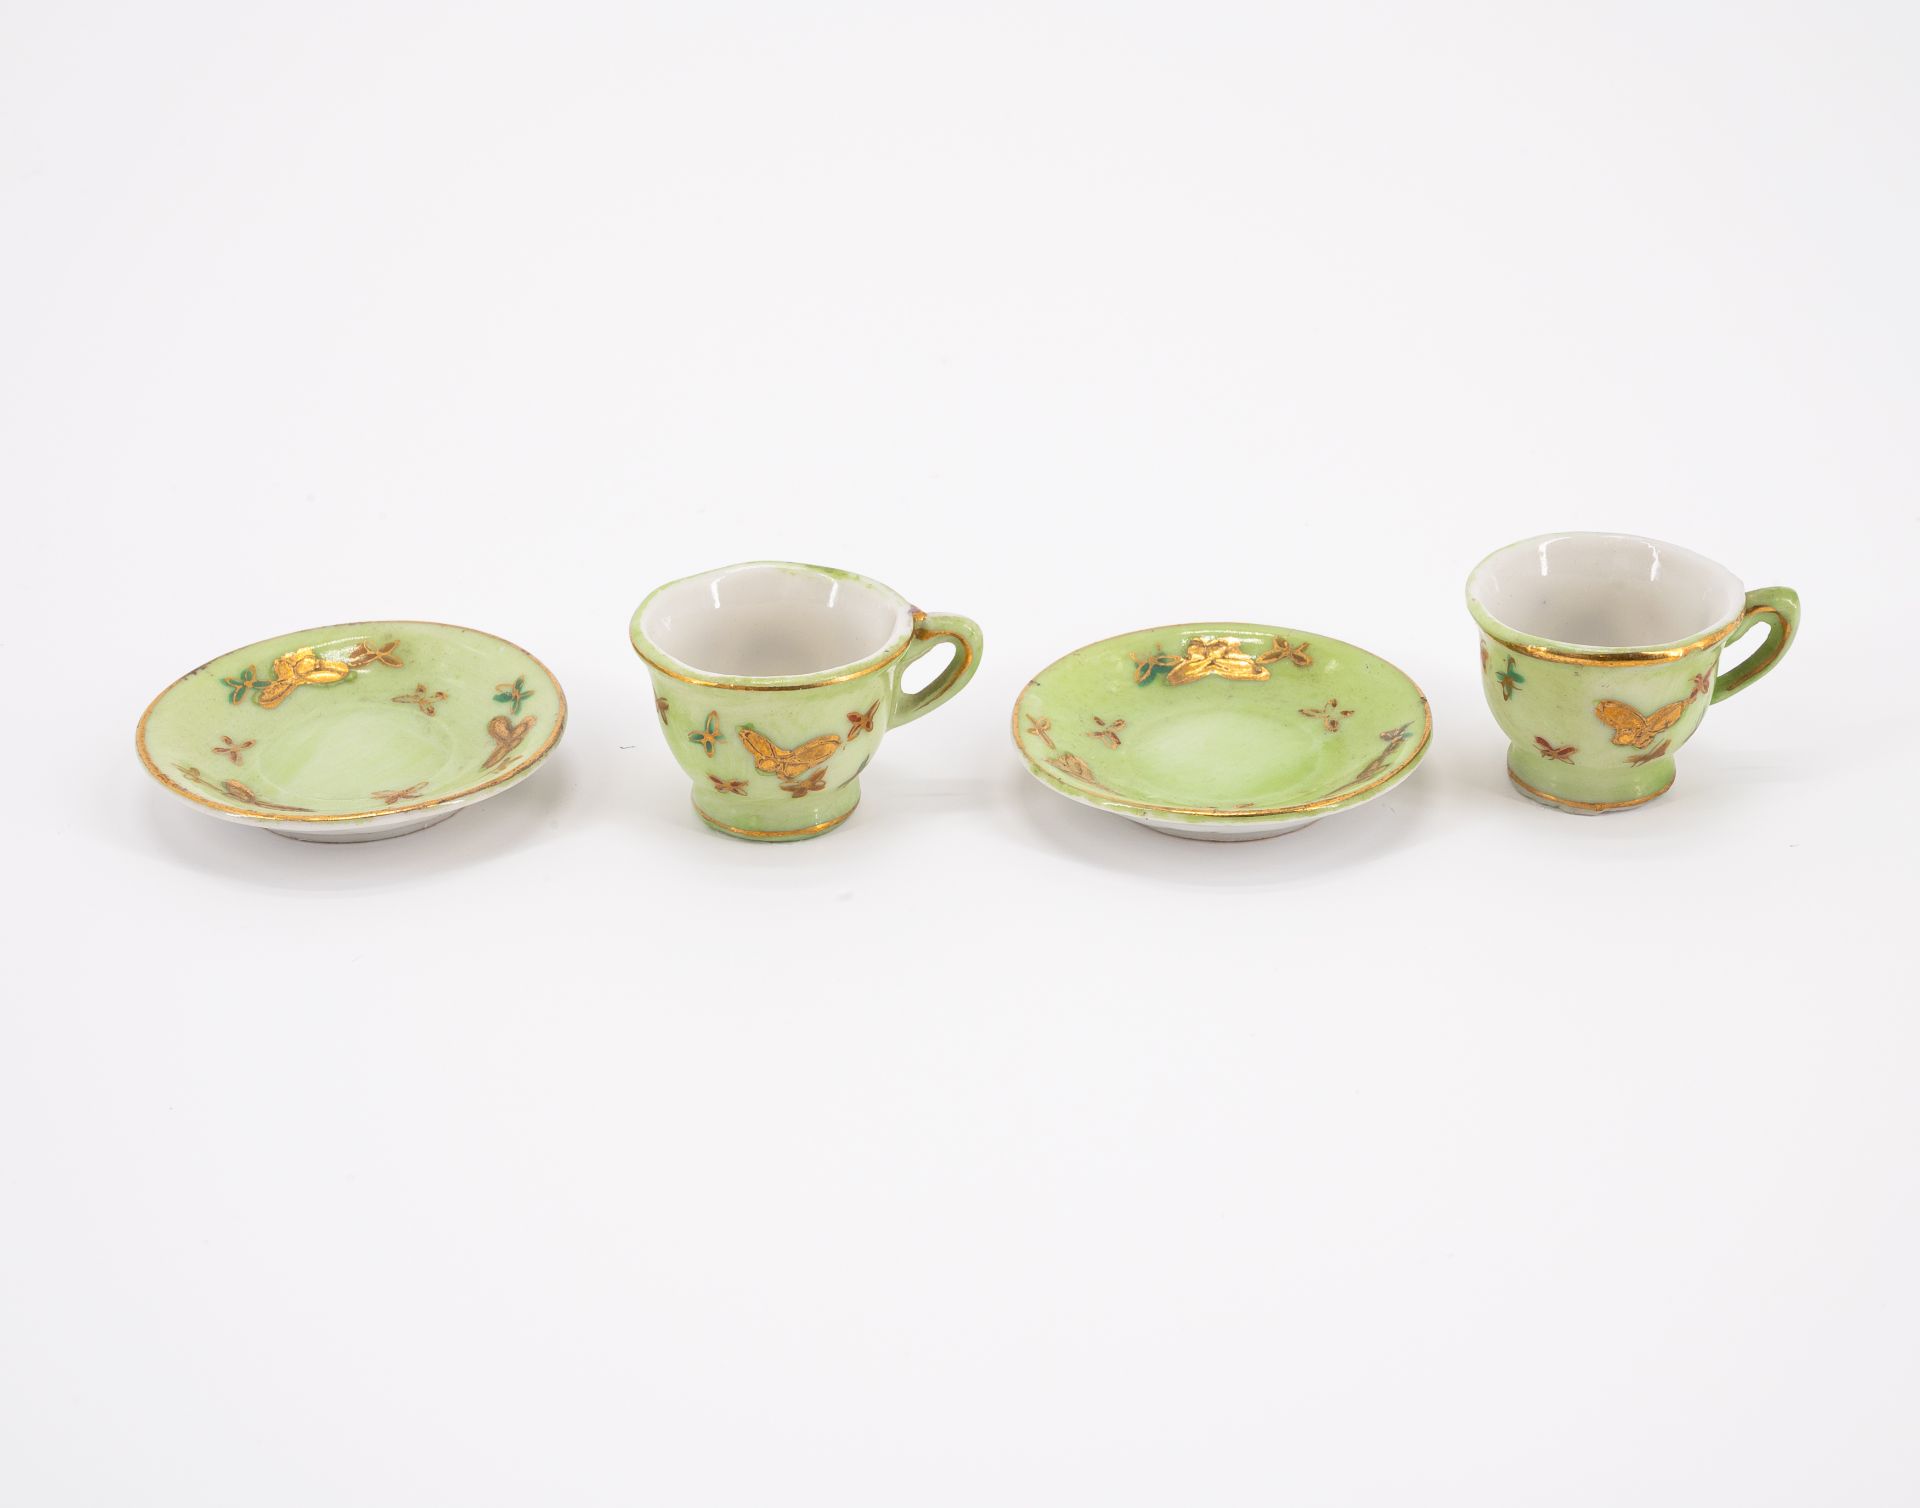 Germany: CERAMIC MINIATURE DINNER SERVICE AND PORCELAIN MINIATURE TEASERVICE - Image 9 of 16